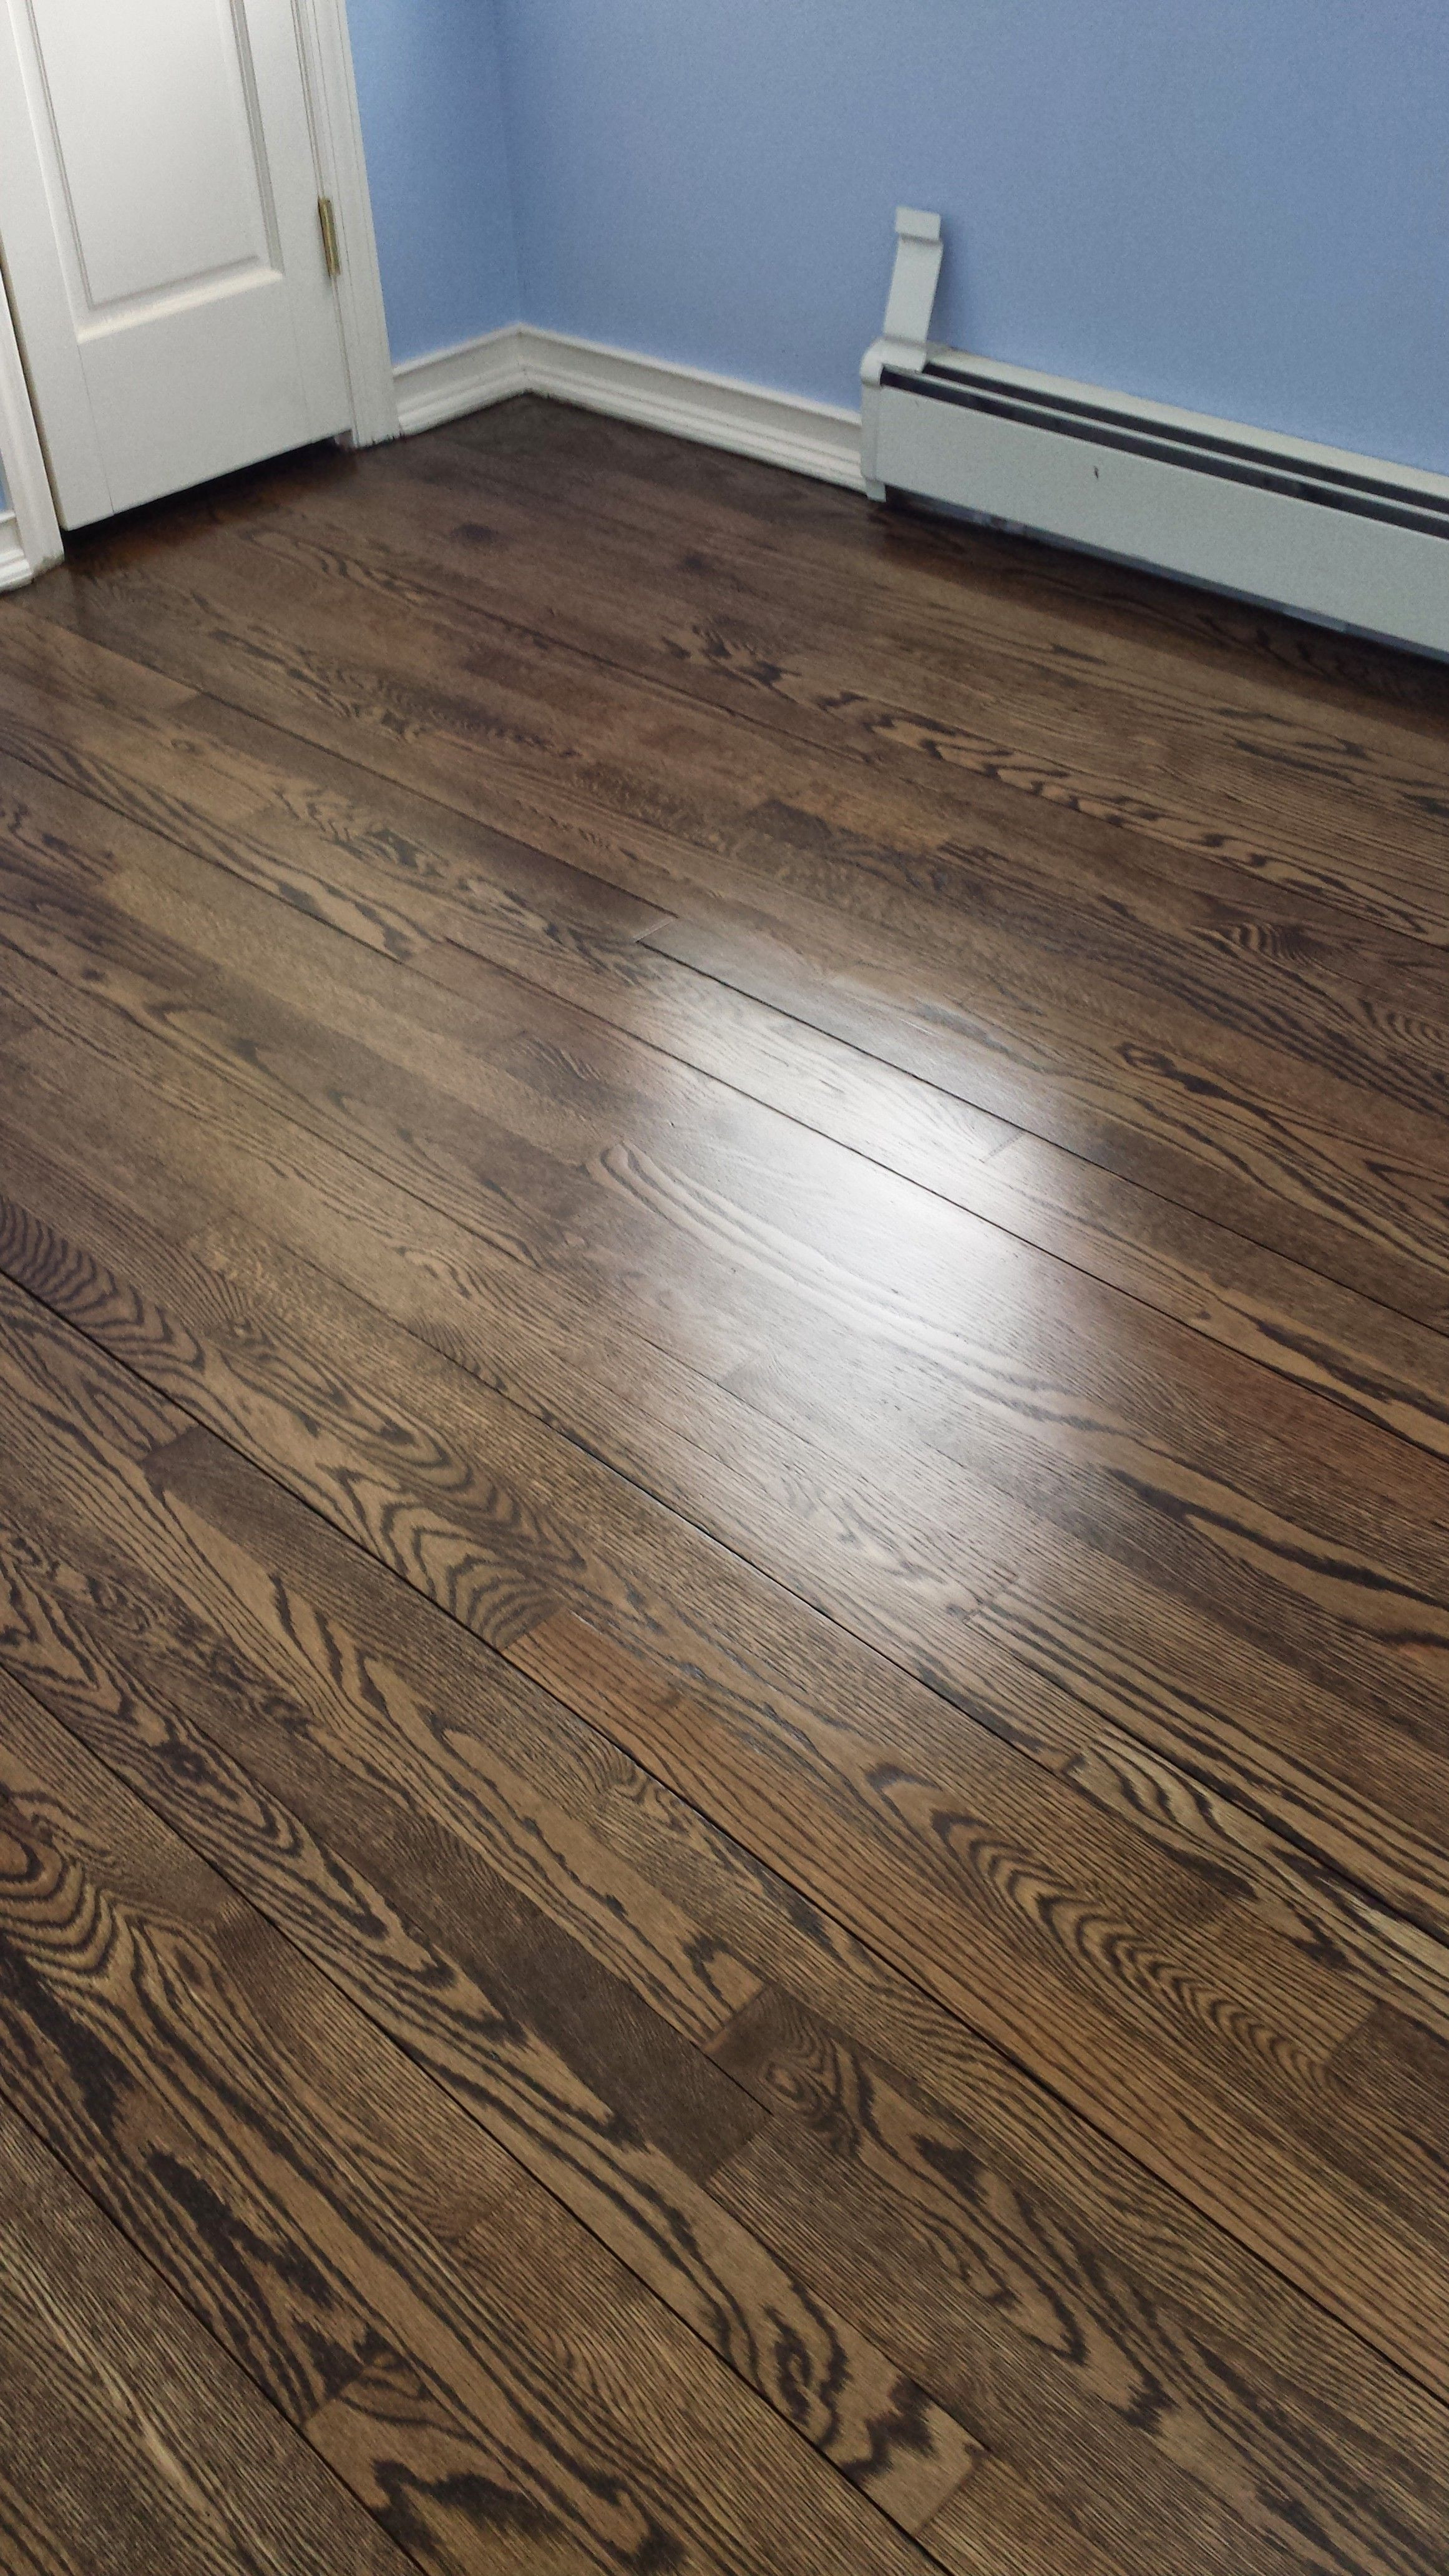 21 Trendy Hardwood Floor Sanding toronto 2024 free download hardwood floor sanding toronto of inexpensive hardwood flooring floor plan ideas intended for hardwood floor refinishing is an affordable way to spruce up your space without a full replaceme